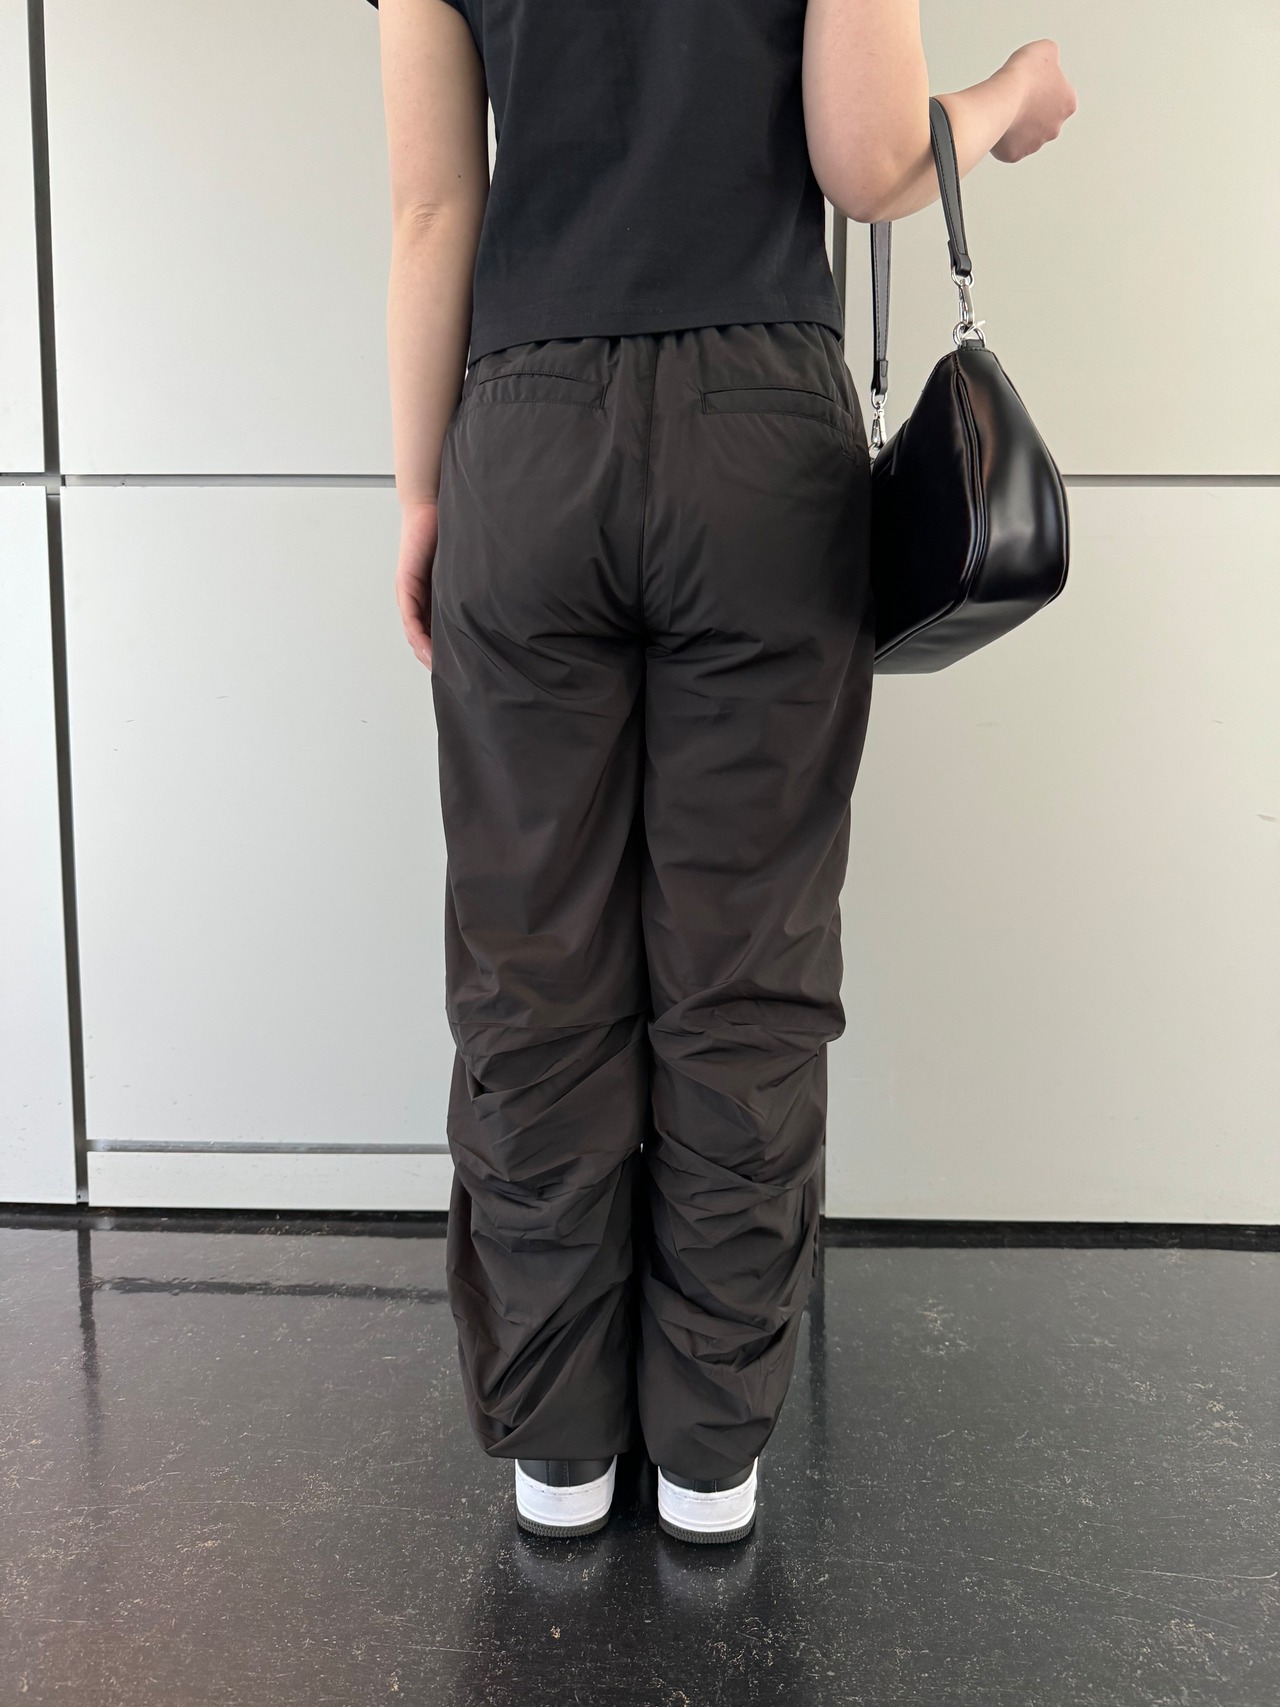 【X-girl】LOOSE FIT TUCK PANTS【エックスガール】